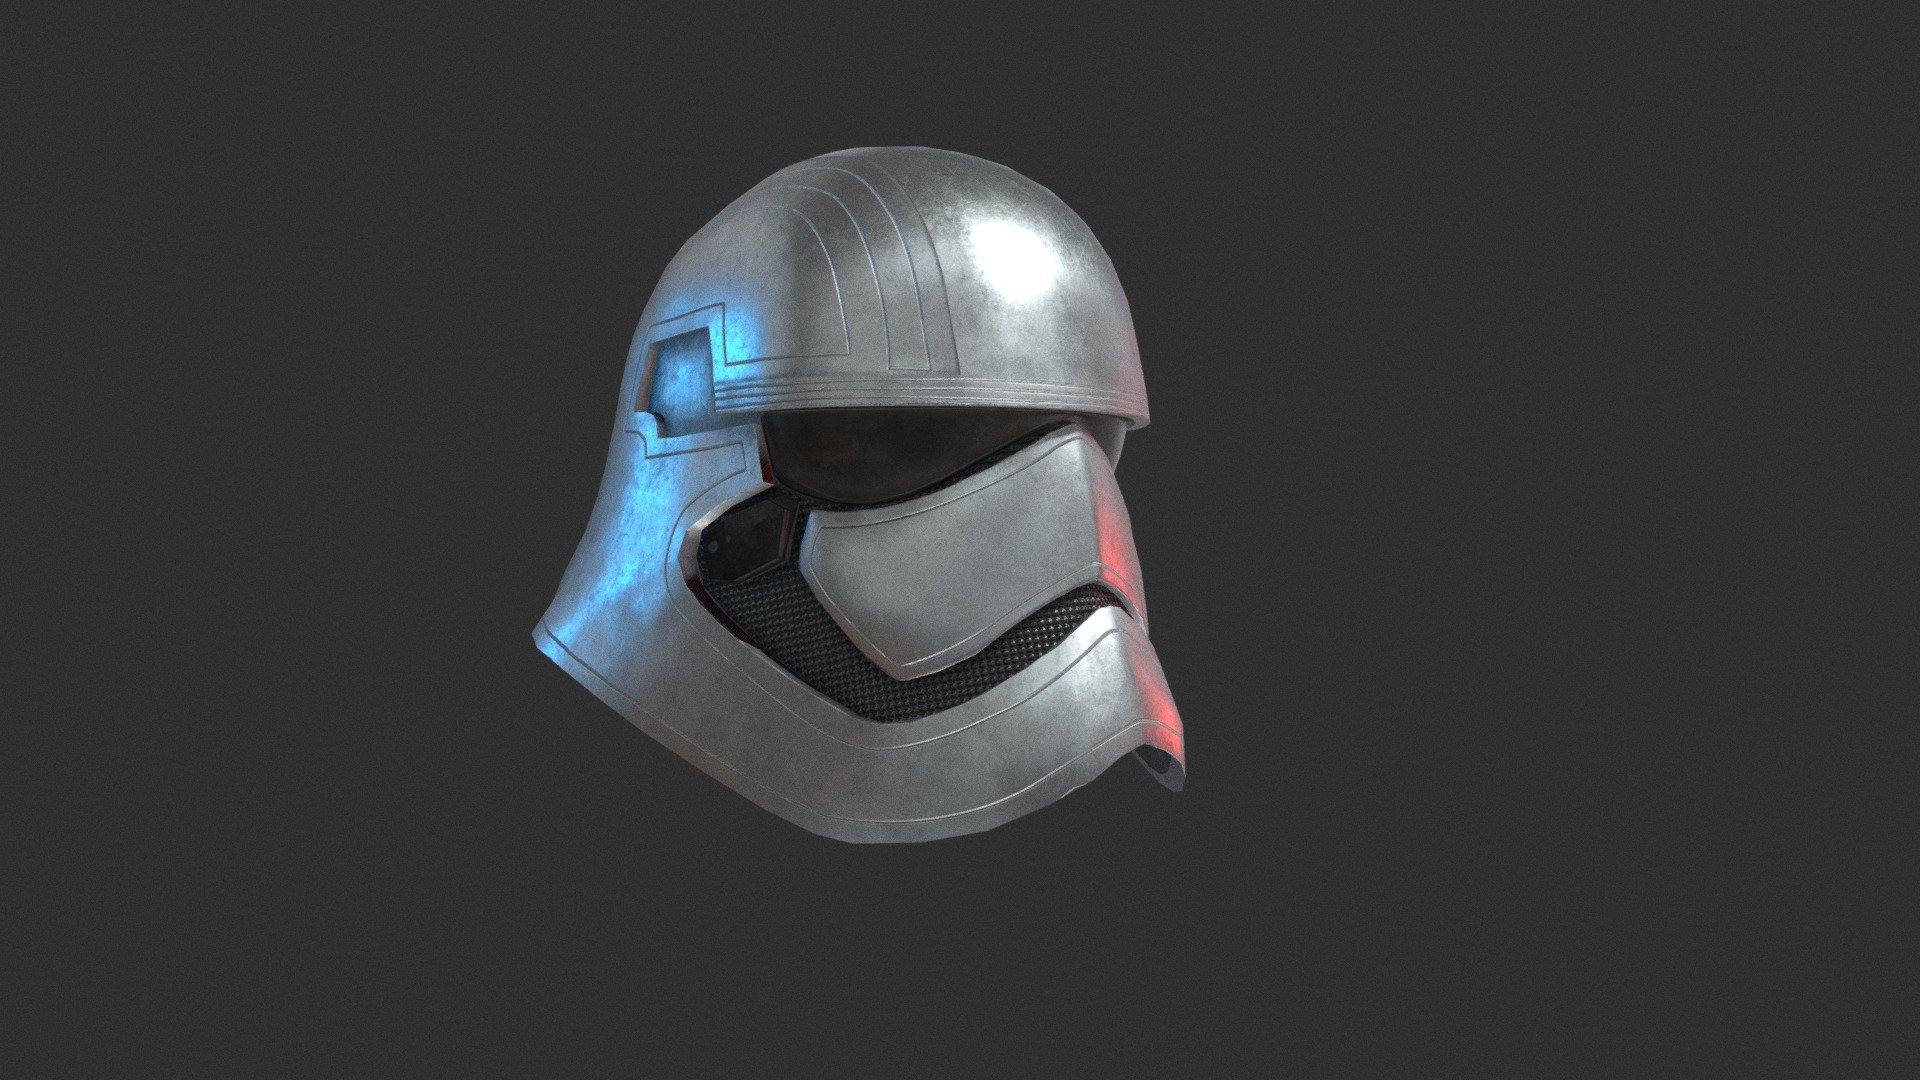 3D model of Used StarWars Phasma Helmet
Resolution of textures: 4096x4096
 - Originally created with 3ds Max 2017
 - Textured created with Substance Painter
 - Unit system is set to centimetre
 - Model is built to real-world scale
 - Rendered in Marmoset Toolbag, 3ds Max Vray, Maya Vray
 - Texture Set: Diffuse, Base Color, IOR, Gloss, Heigh, IOR, Normal, Reflection, Specular, 

Special notes:

.fbx format is recommended for import in other 3d software. If your software doesn't support .fbx format, please use .3ds format; .obj, format was exported from 3ds Max 3d model